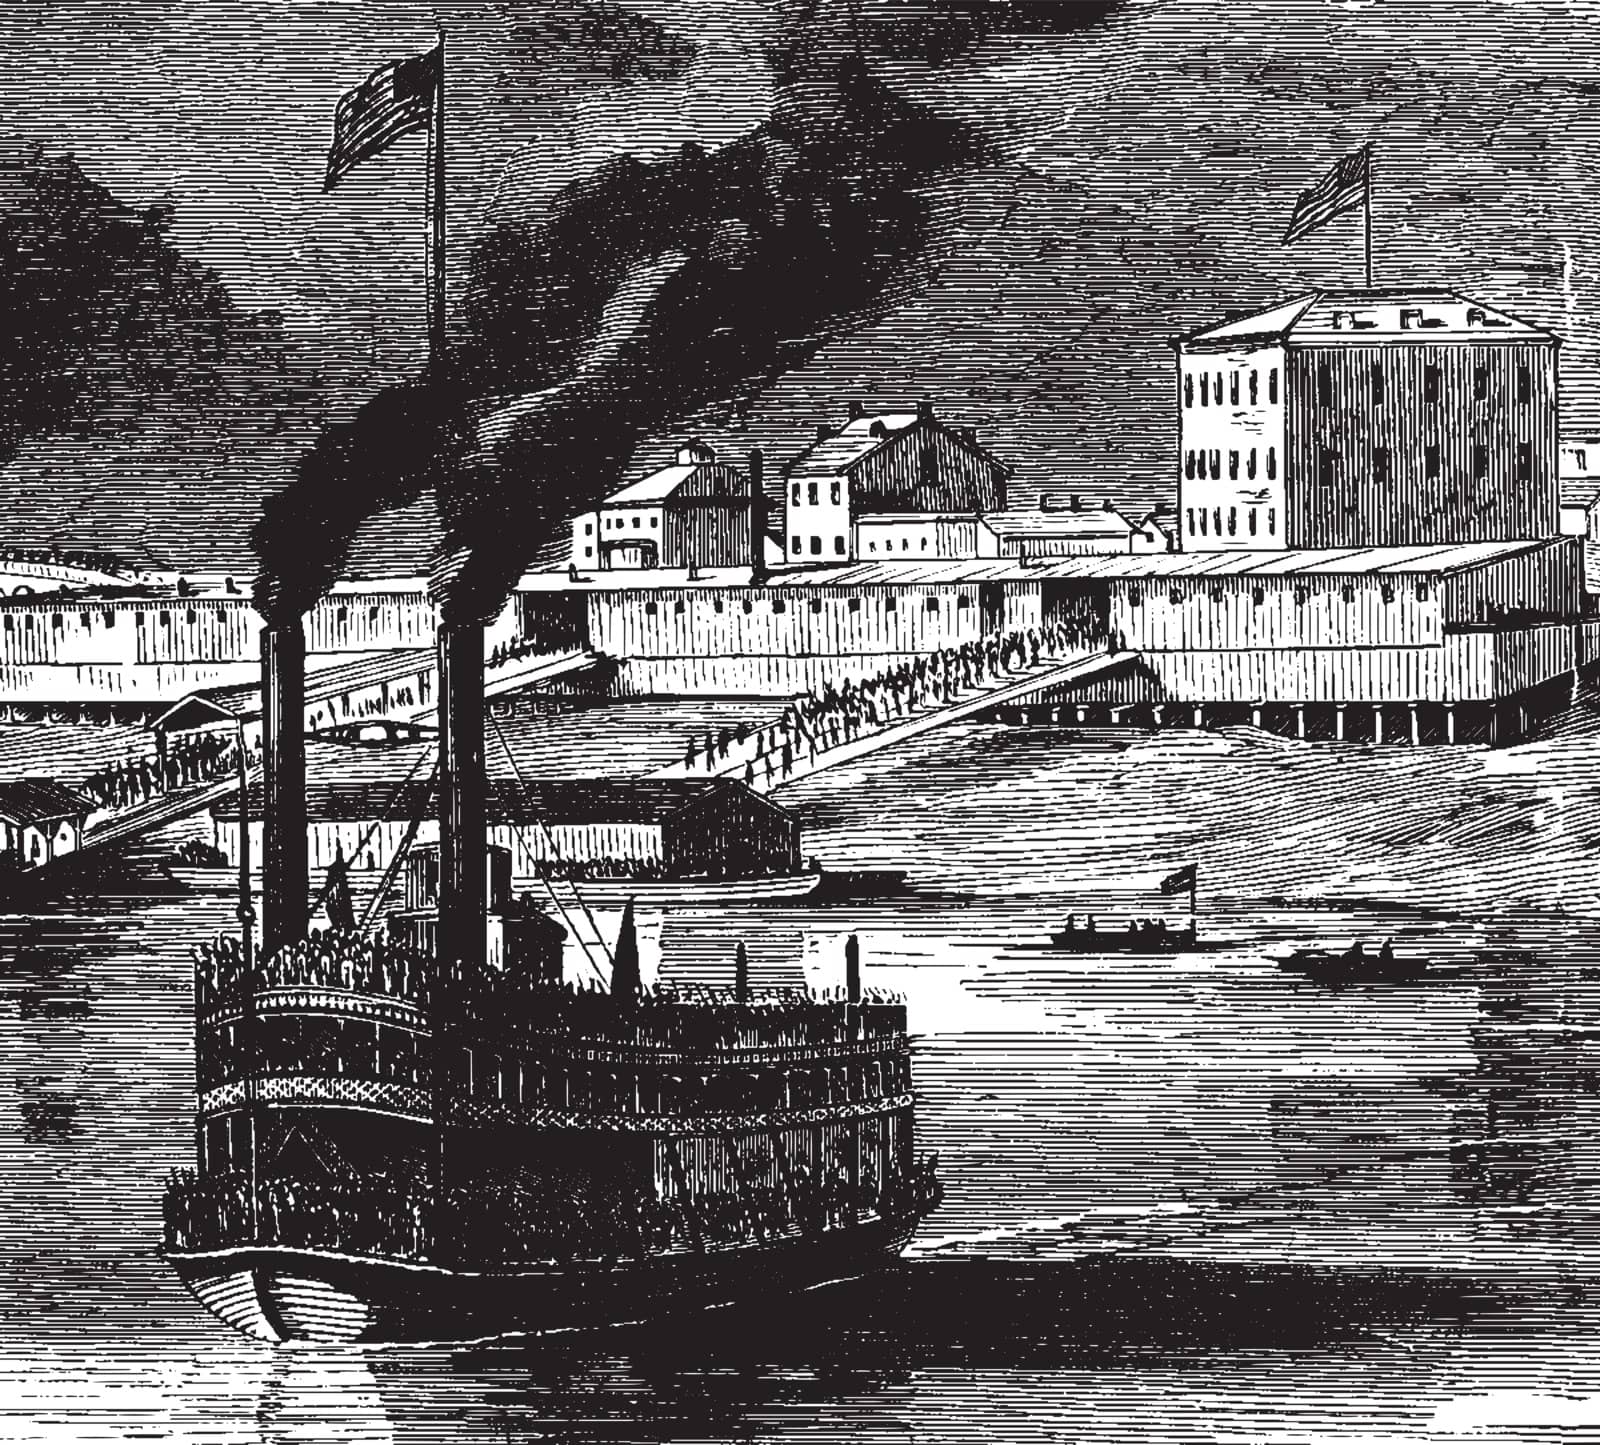 Bellaire is a town situated on the Ohio River and three miles below Wheeling, vintage line drawing or engraving illustration.